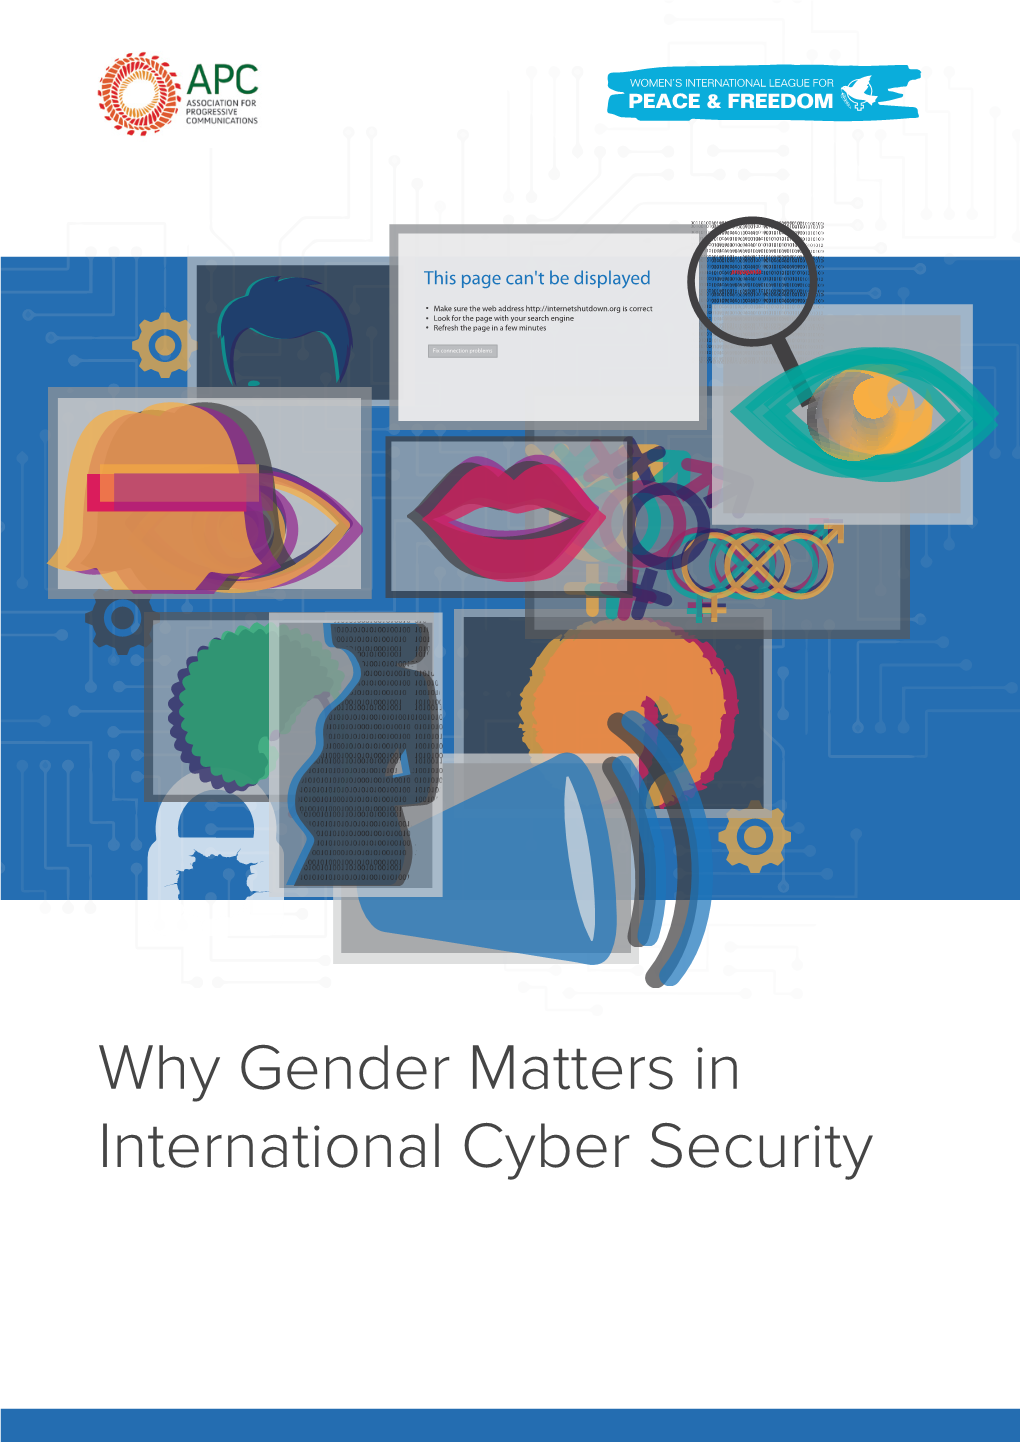 Why Gender Matters in International Cyber Security © 2020 Women’S International League for Peace and Freedom and the Association for Progressive Communications